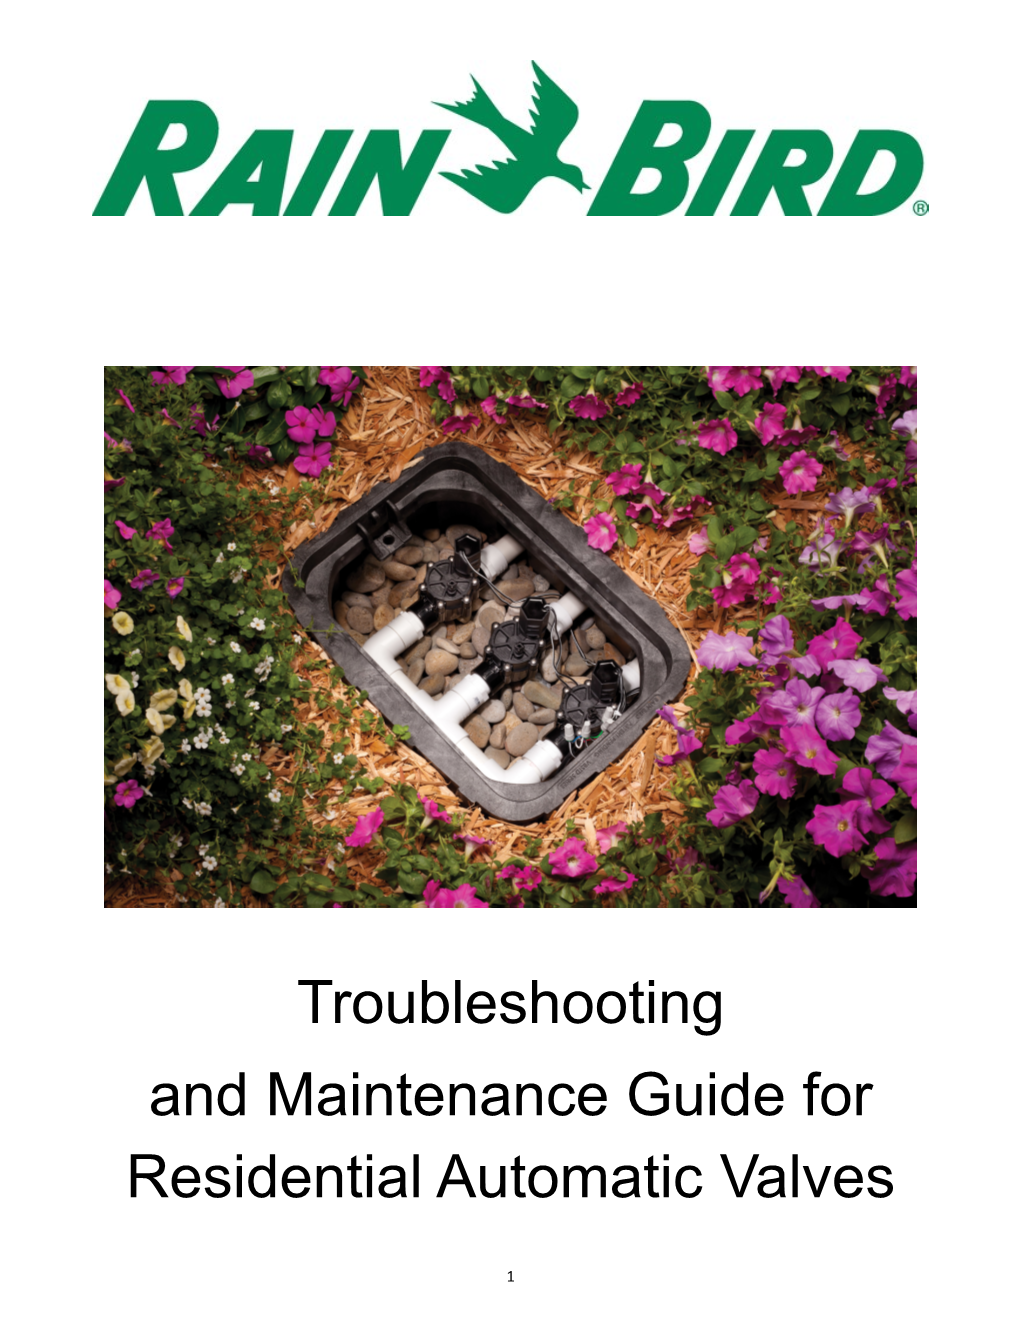 Troubleshooting and Maintenance Guide for Residential Automatic Valves